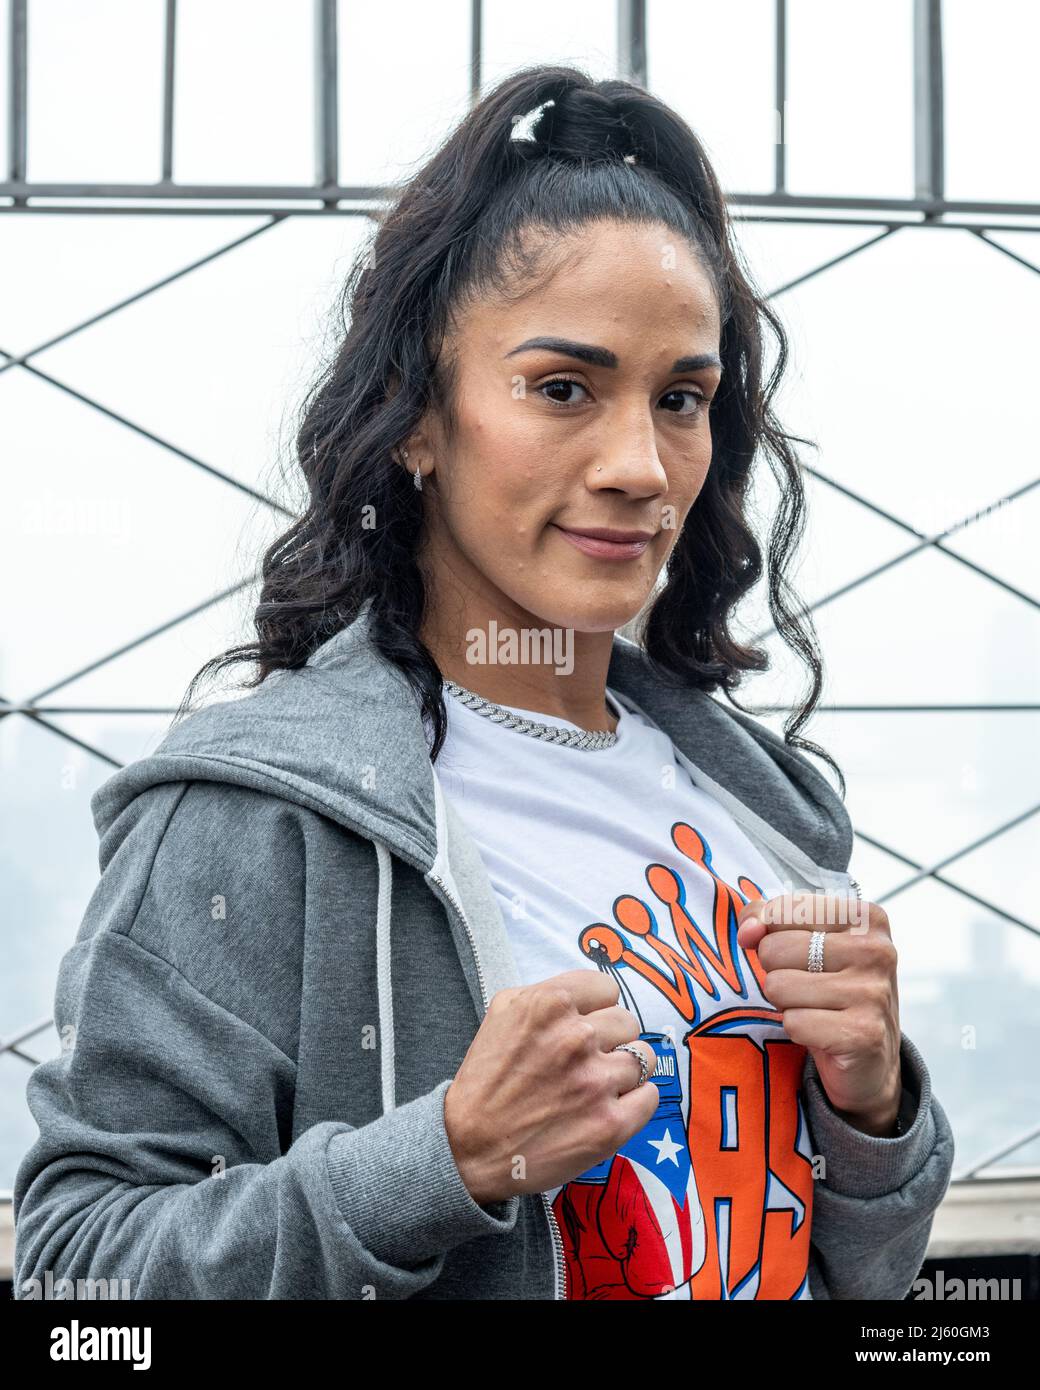 New York, USA. 26th Apr, 2022. Seven-division World Champion Amanda Serrano of Puerto Rico poses during a promotional event at the observatory atop the Empire State building. Serrando and Undisputed World Lightweight Champion Katie Taylor of Ireland, the top two female boxers in the world, turned on the lights of the iconic New York City landmark with the colors of Ireland and Puerto Rico ahead of their history-making fight at the Madison Square Garden for the undisputed World Lightweight Title on Saturday. Credit: Enrique Shore/Alamy Live News Stock Photo